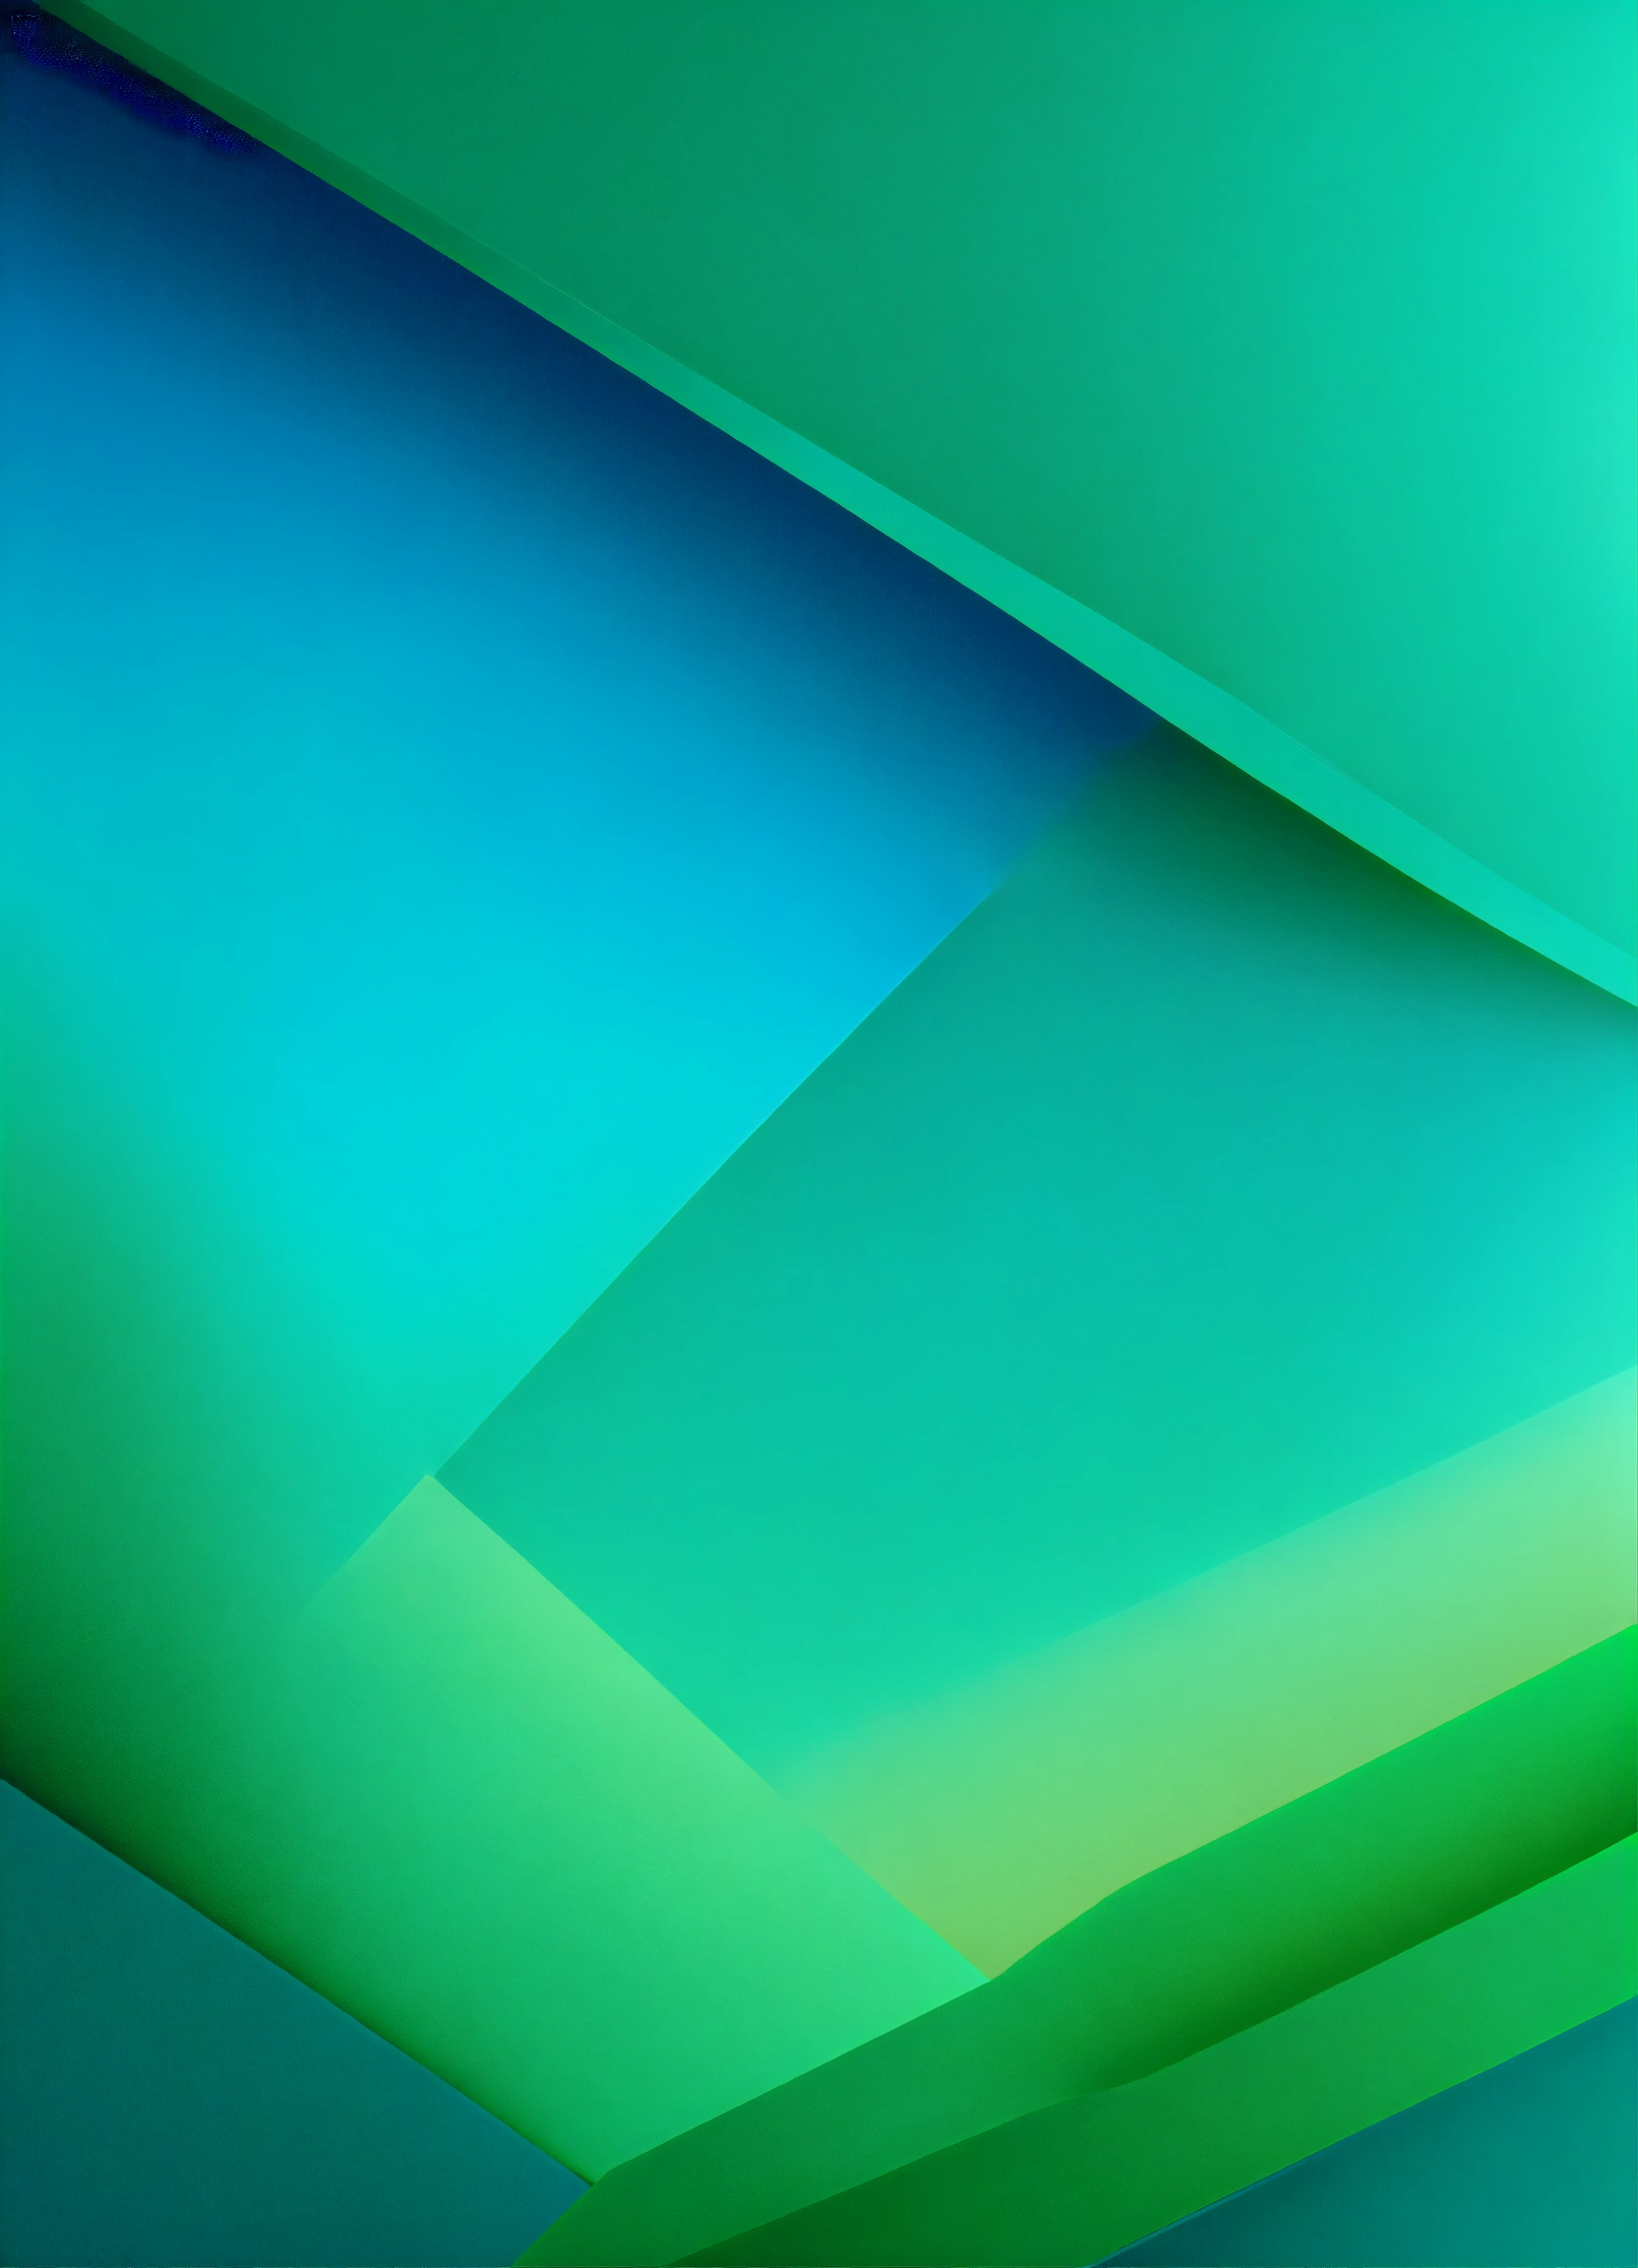 Lexica - Green and blue gradients background, light colors